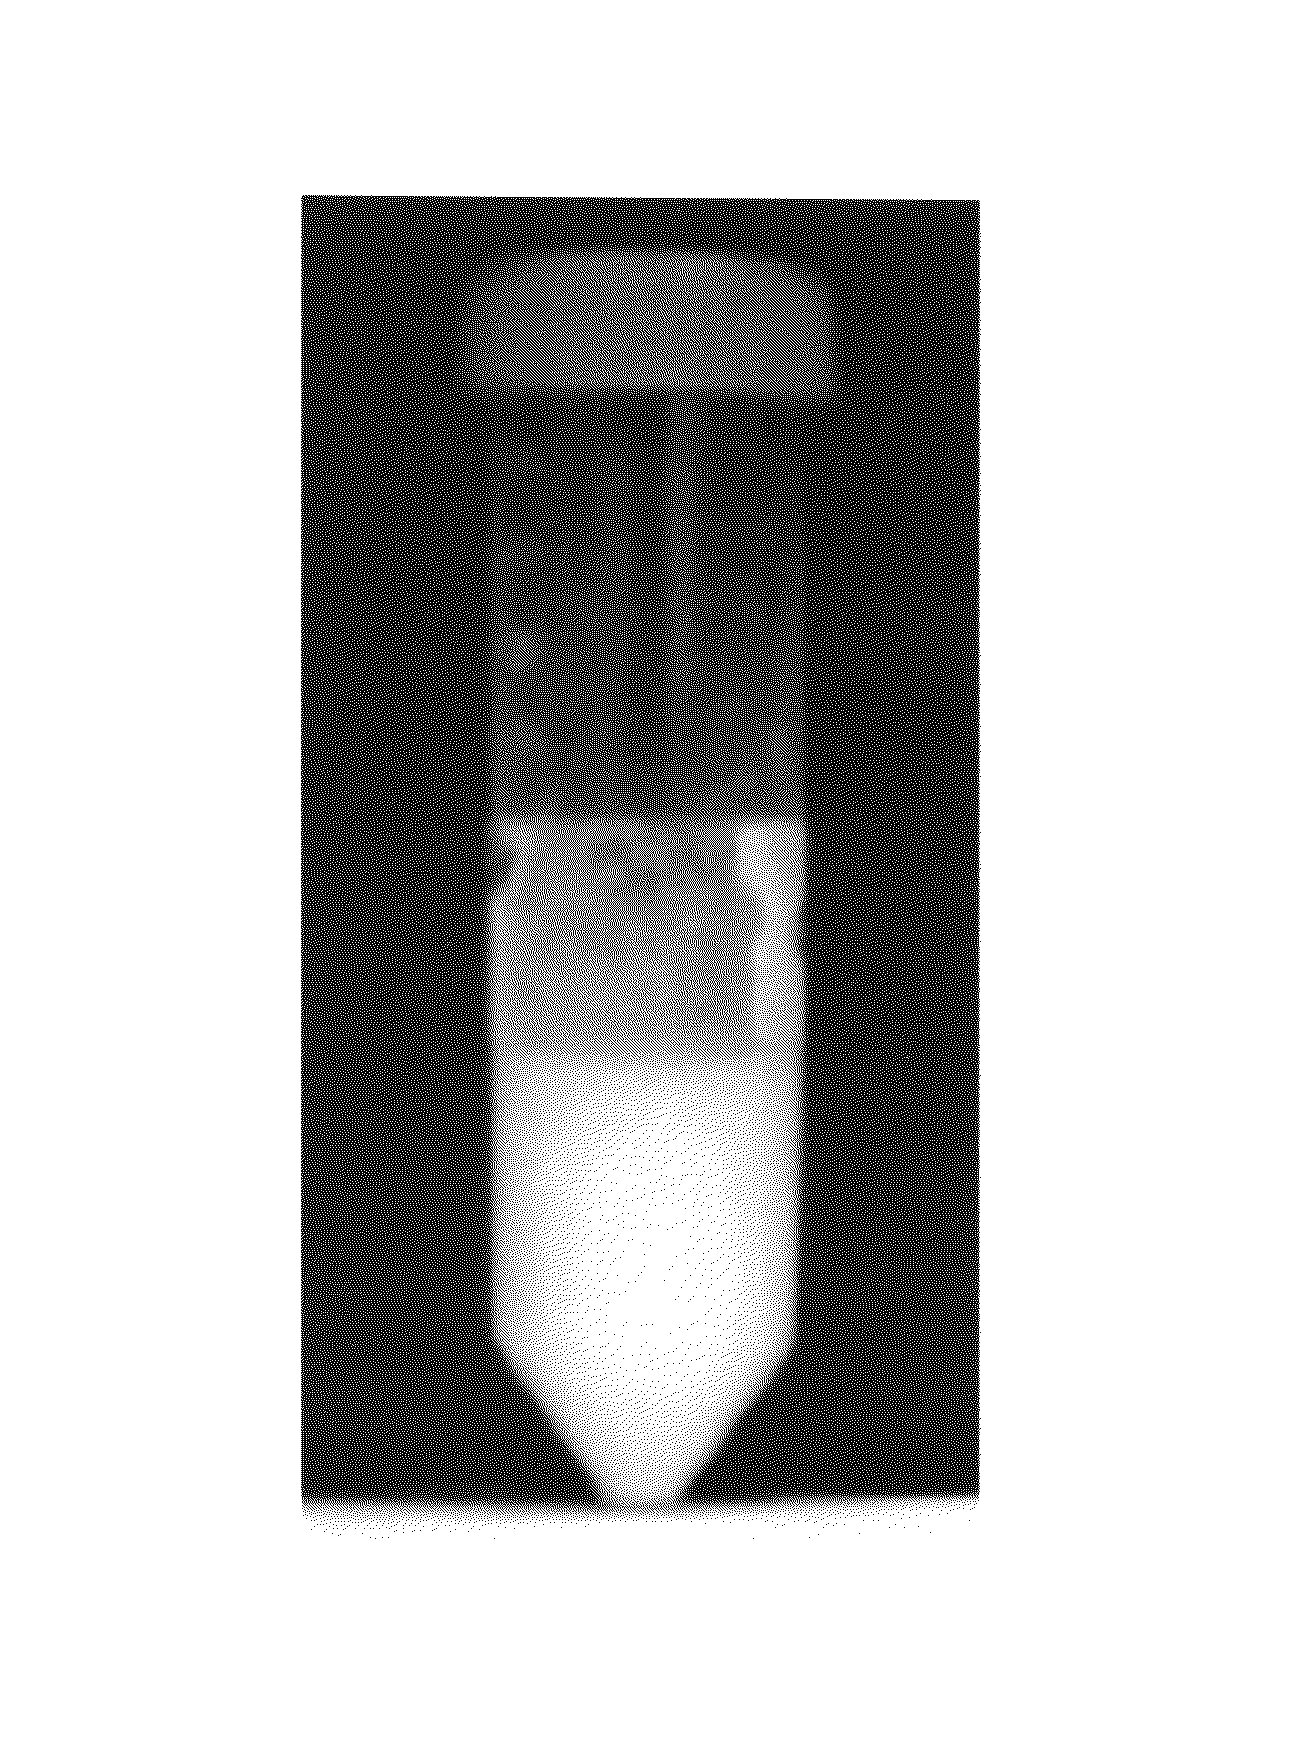 Polymeric compositions containing rhizobium and/or plant growth-promoting rhizobacteria inoculant, use thereof and seeds treated with the compositions